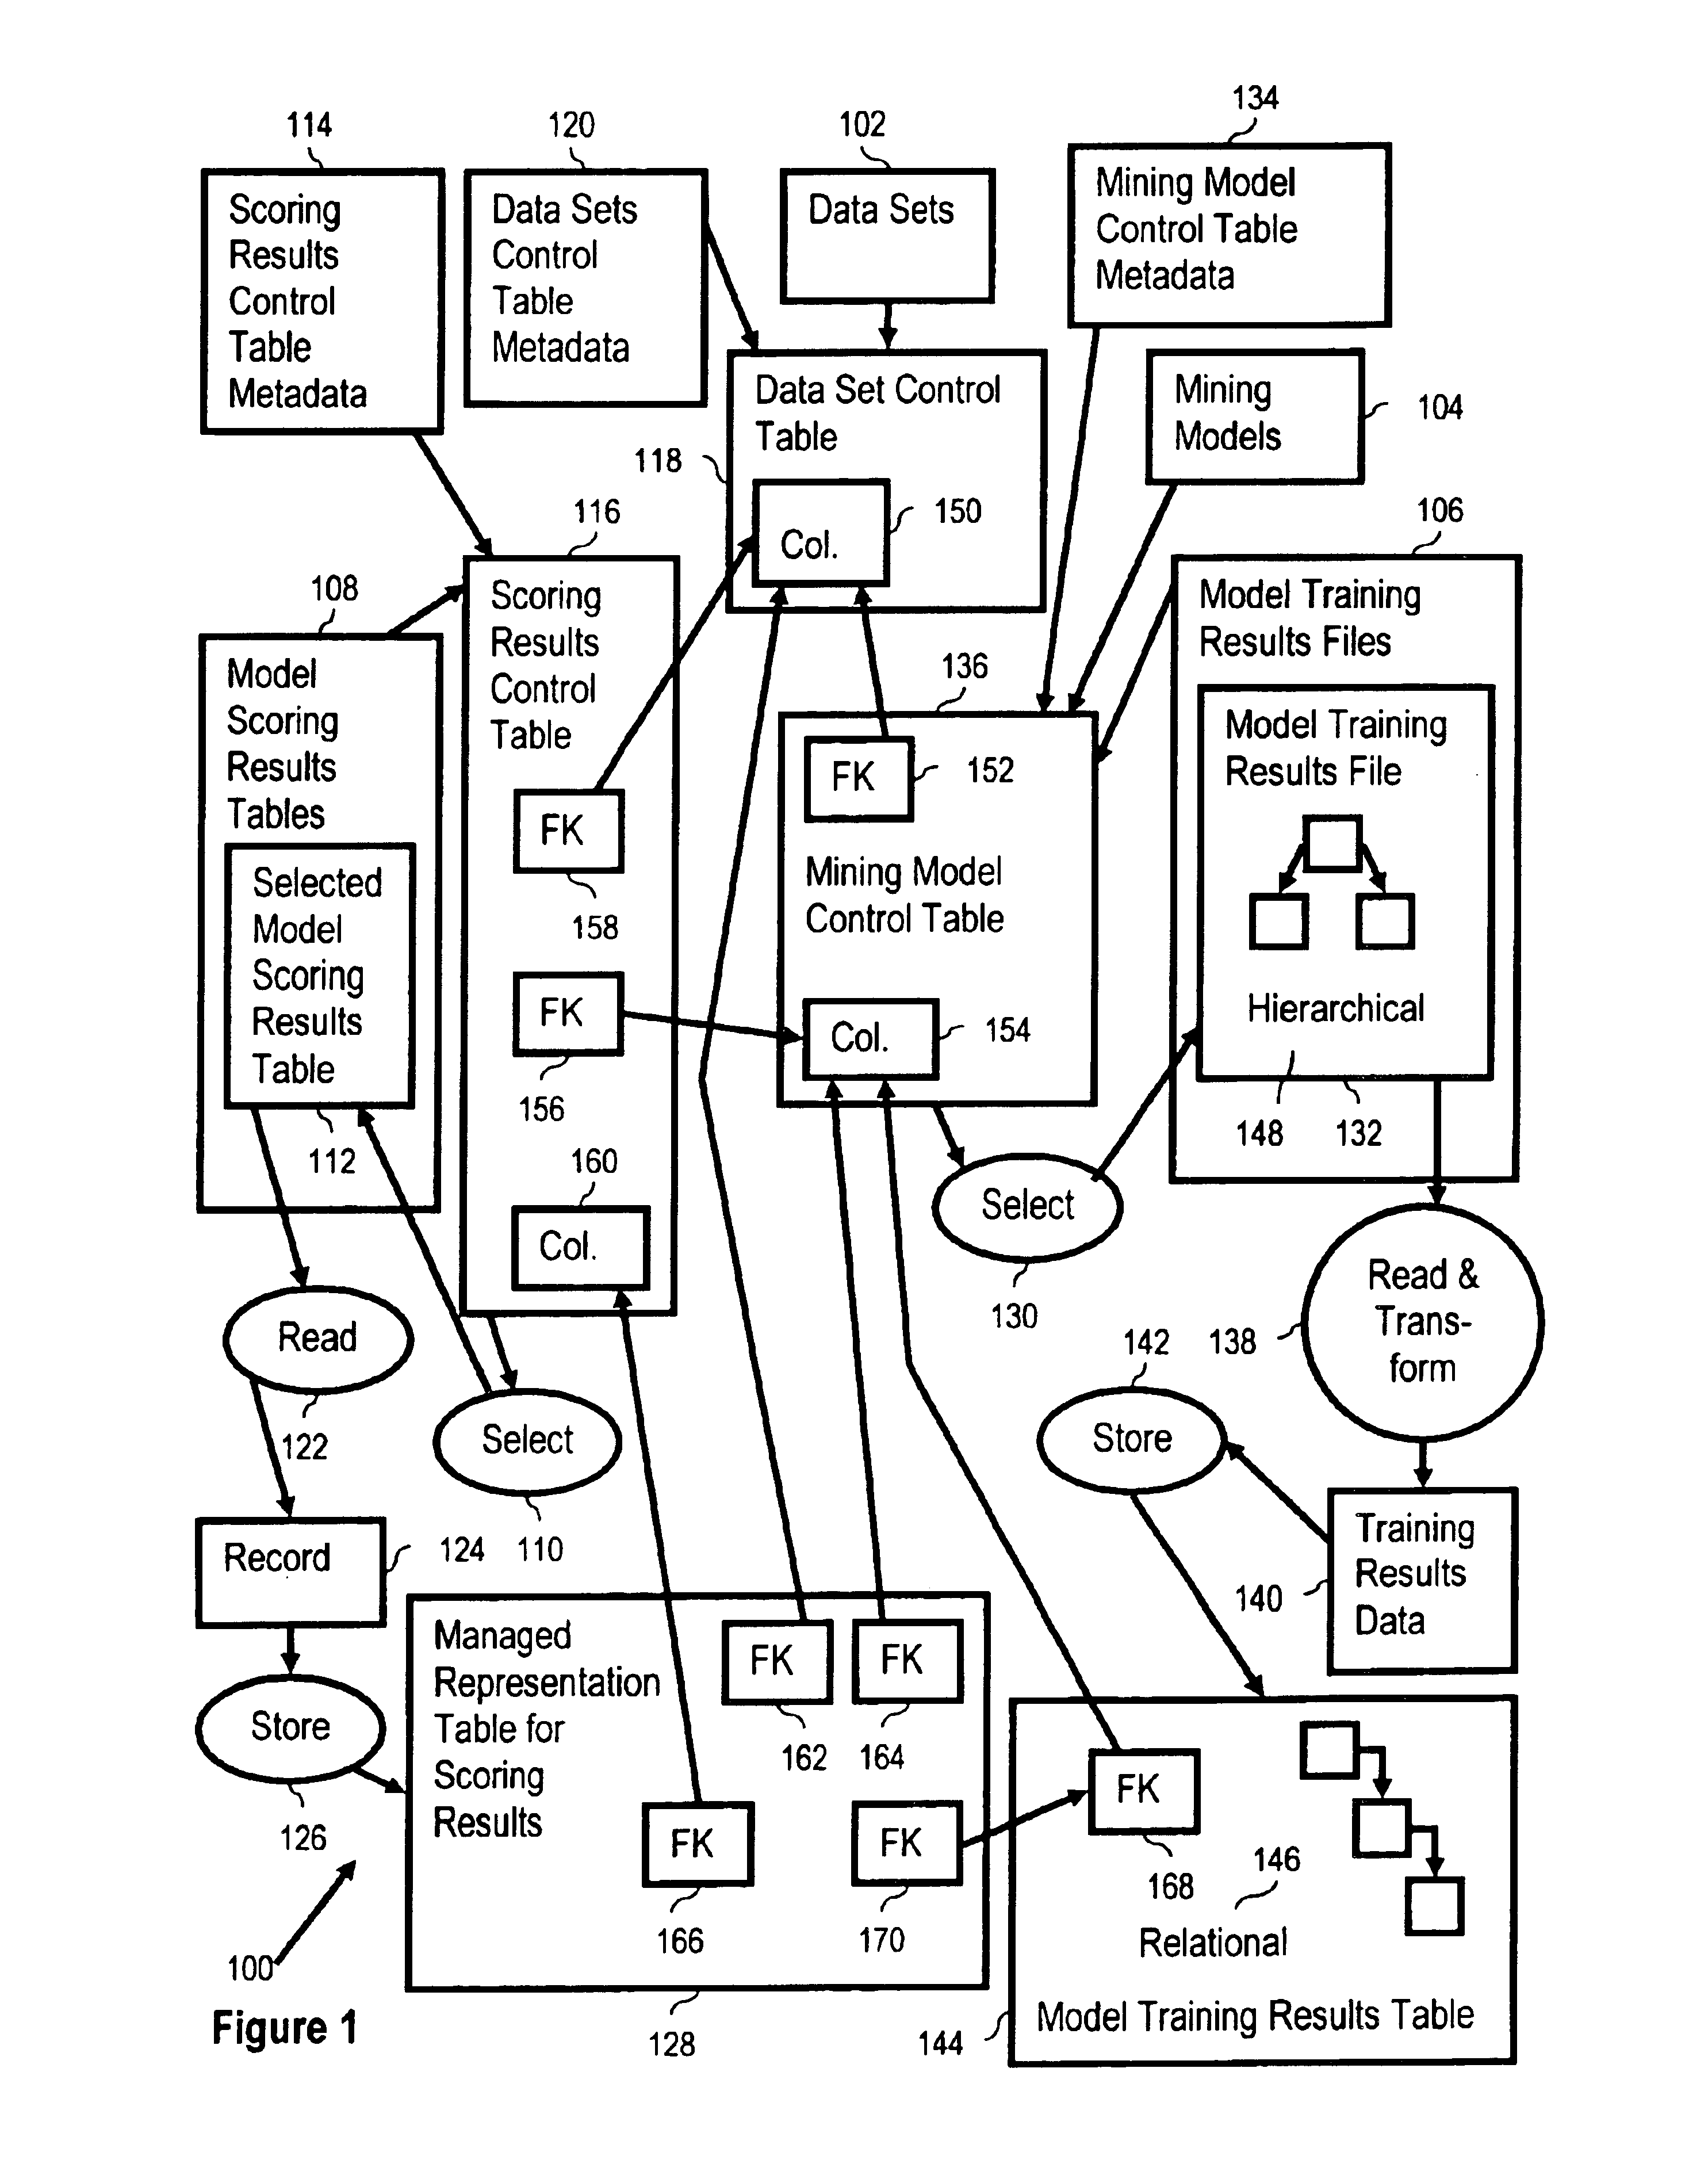 Unified relational database model for data mining selected model scoring results, model training results where selection is based on metadata included in mining model control table